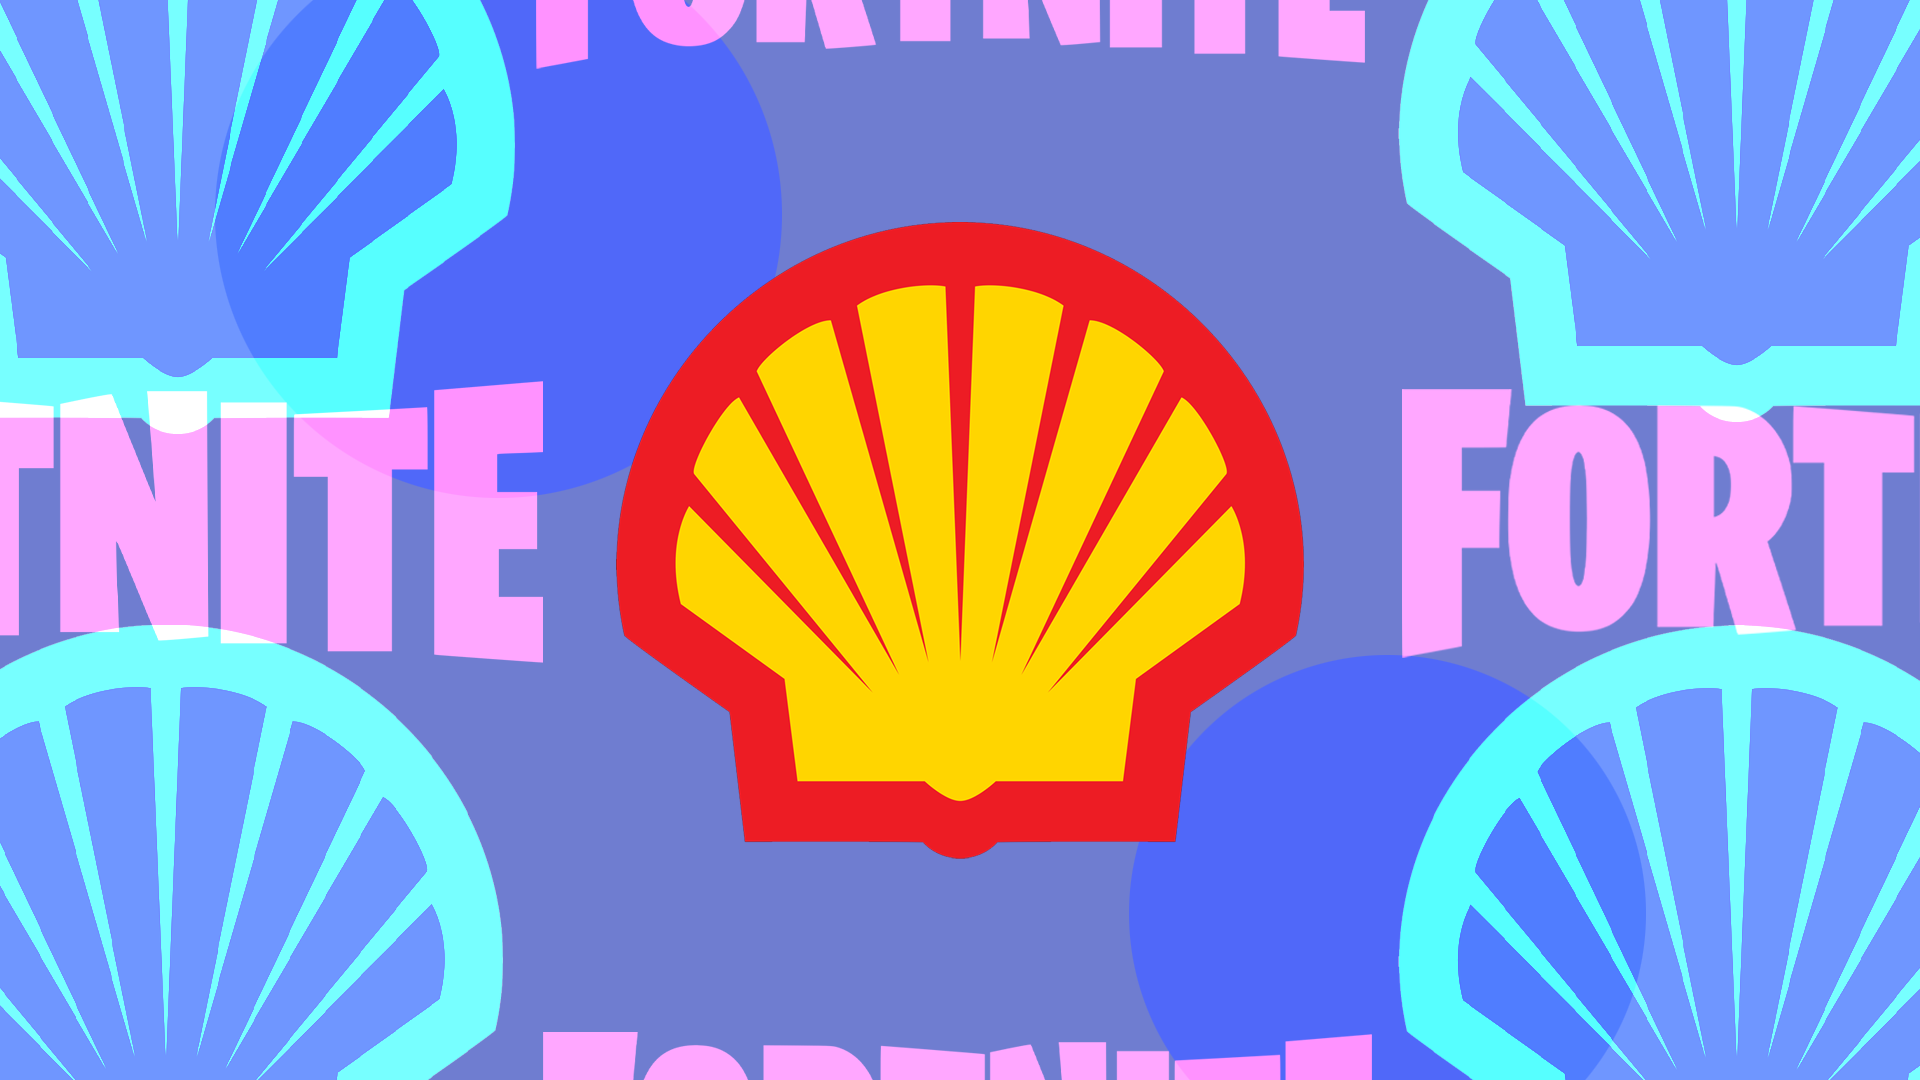 Shell partners with Fortnite to push gasoline